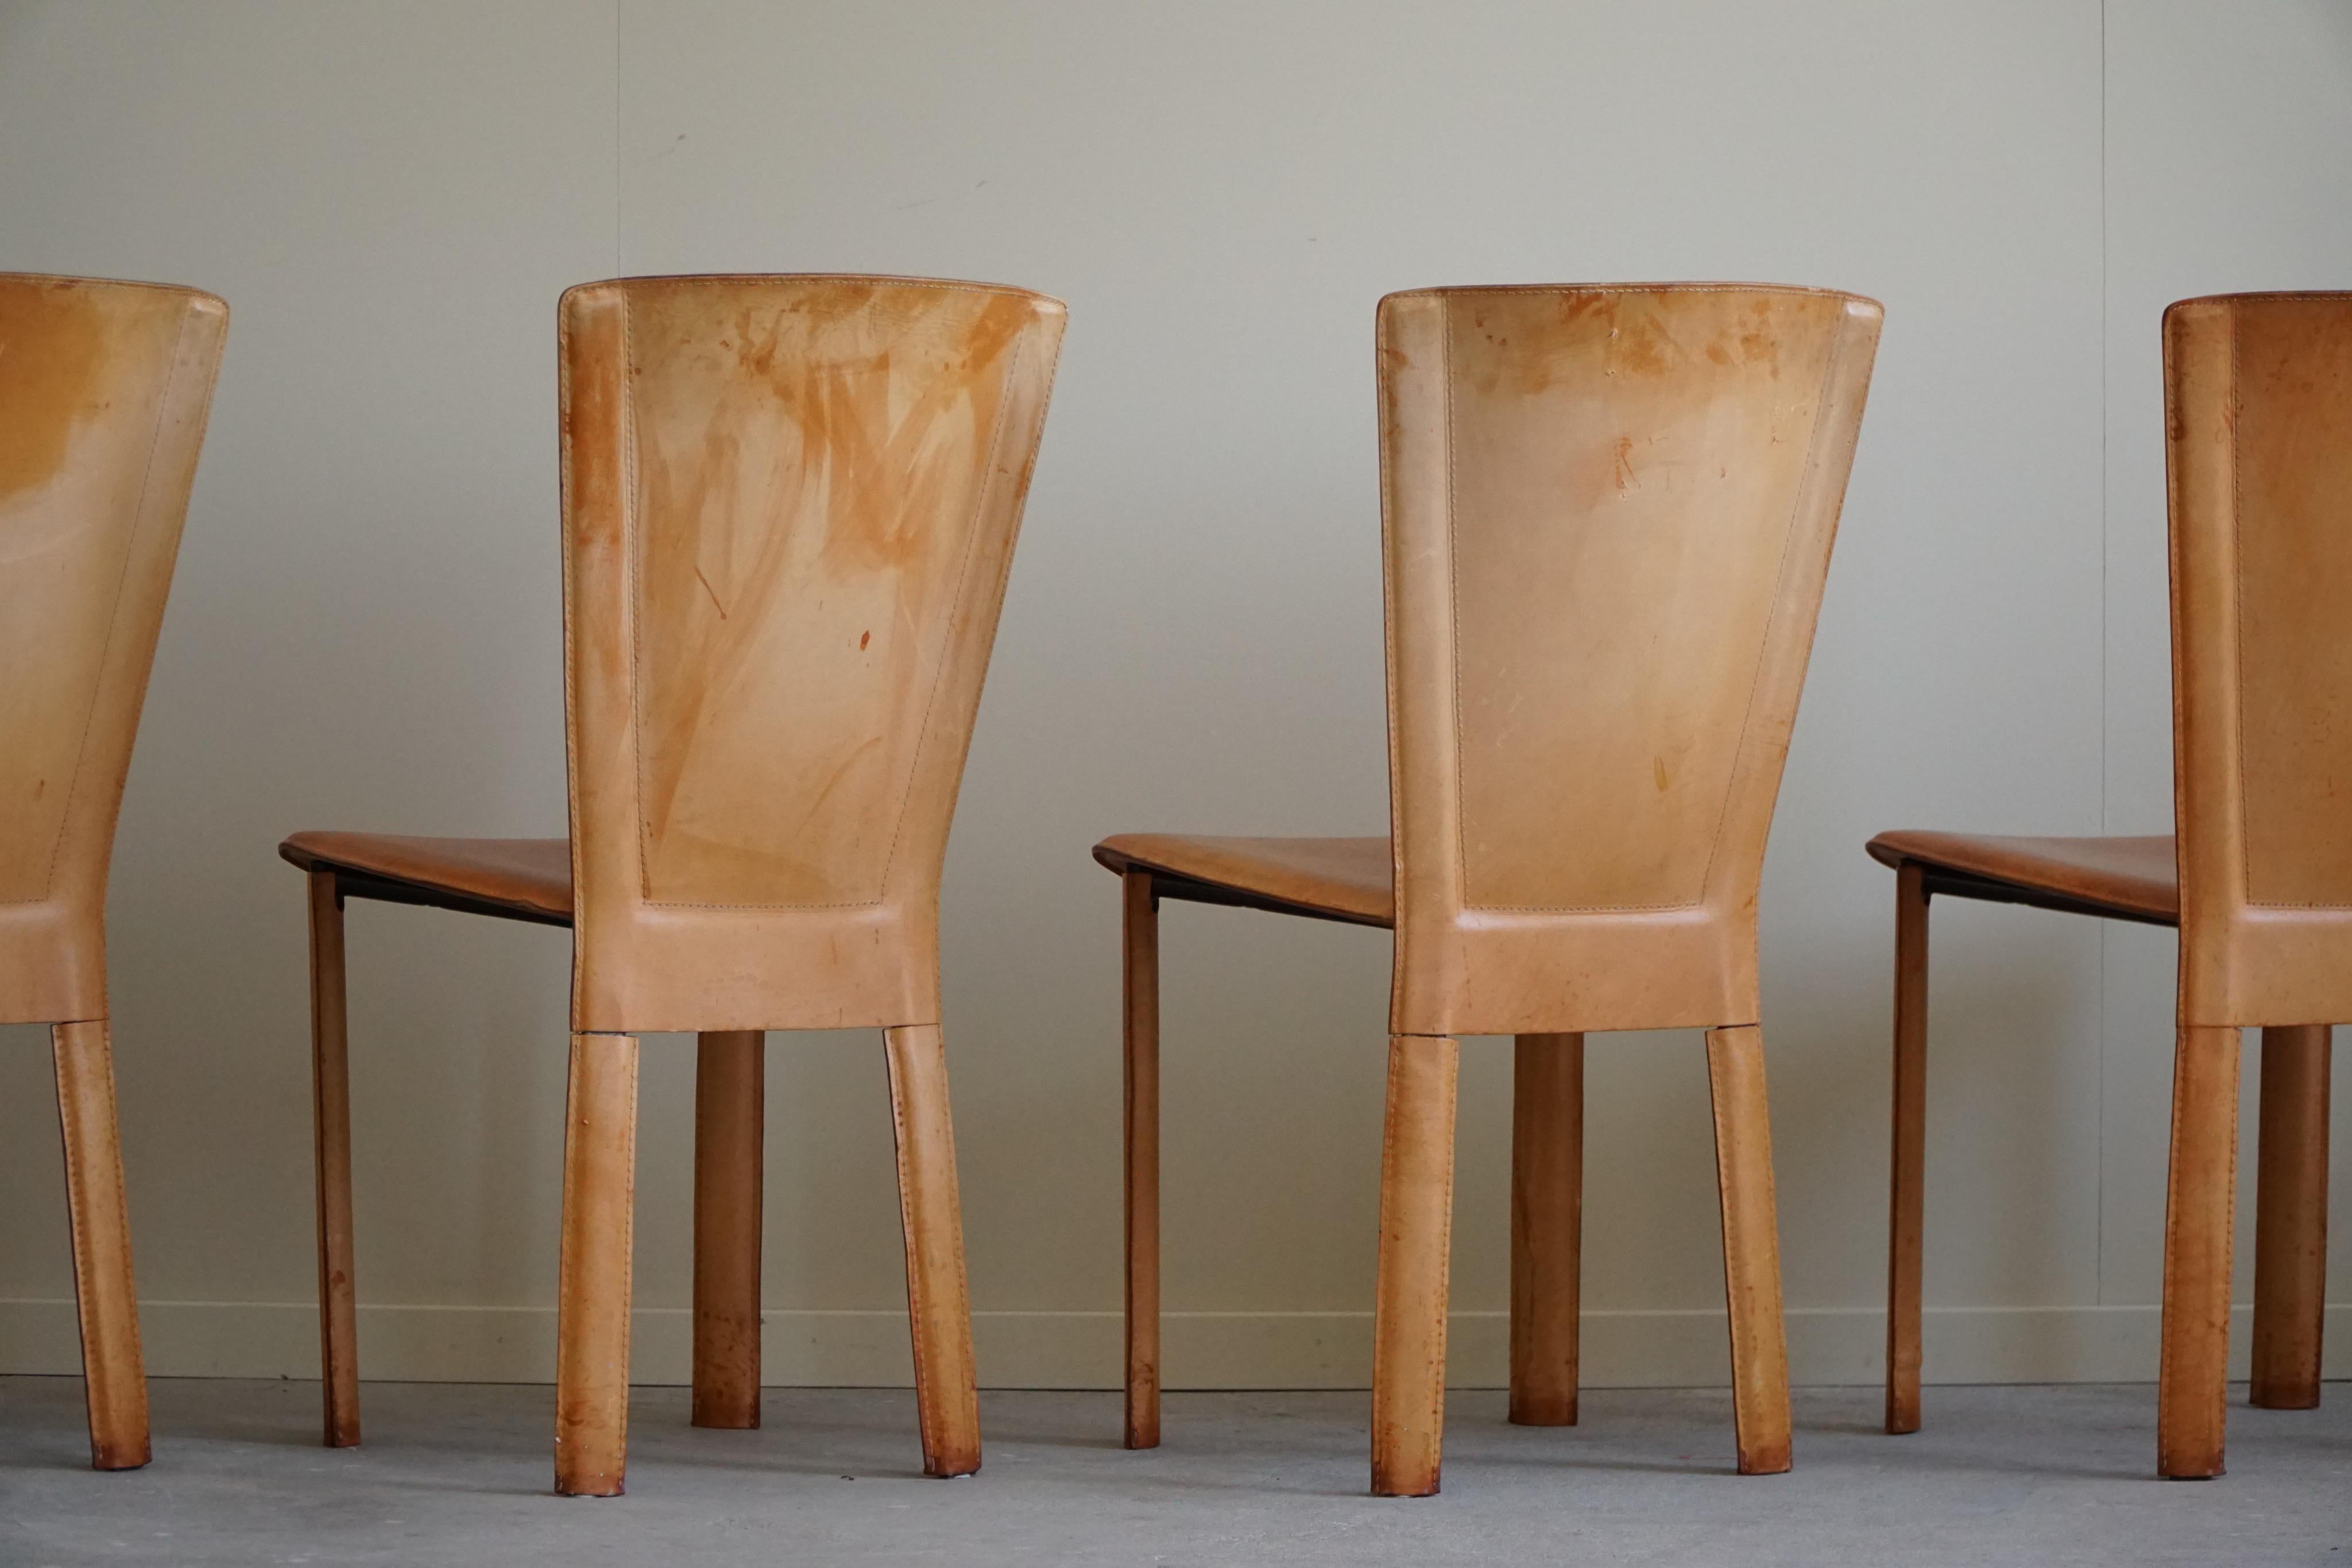 20th Century Italian Modern, Set of 4 Dining Chairs in Cognac Leather, Mario Bellini, 1970s